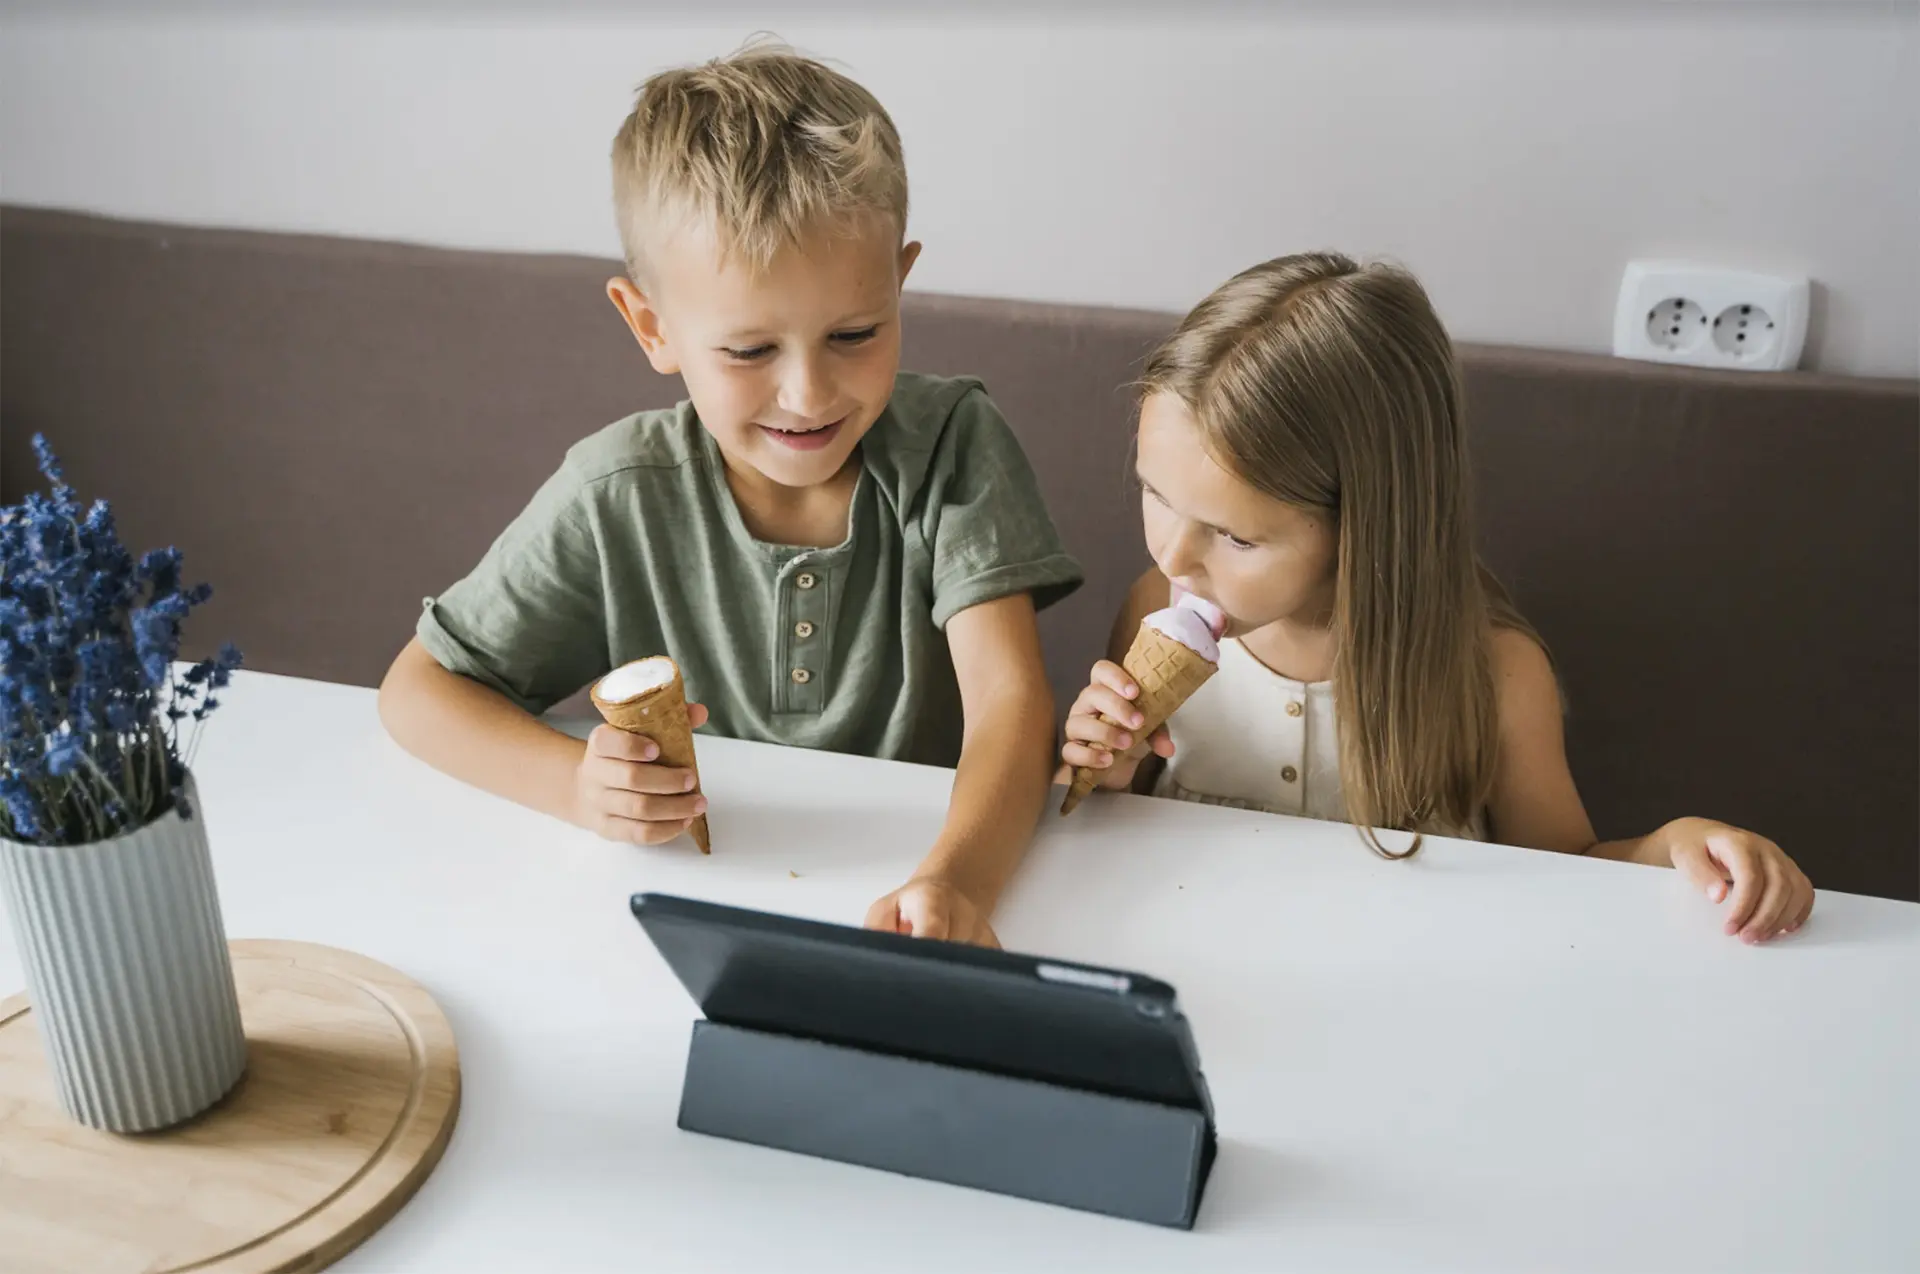 Kids eating icecream in front of ipad